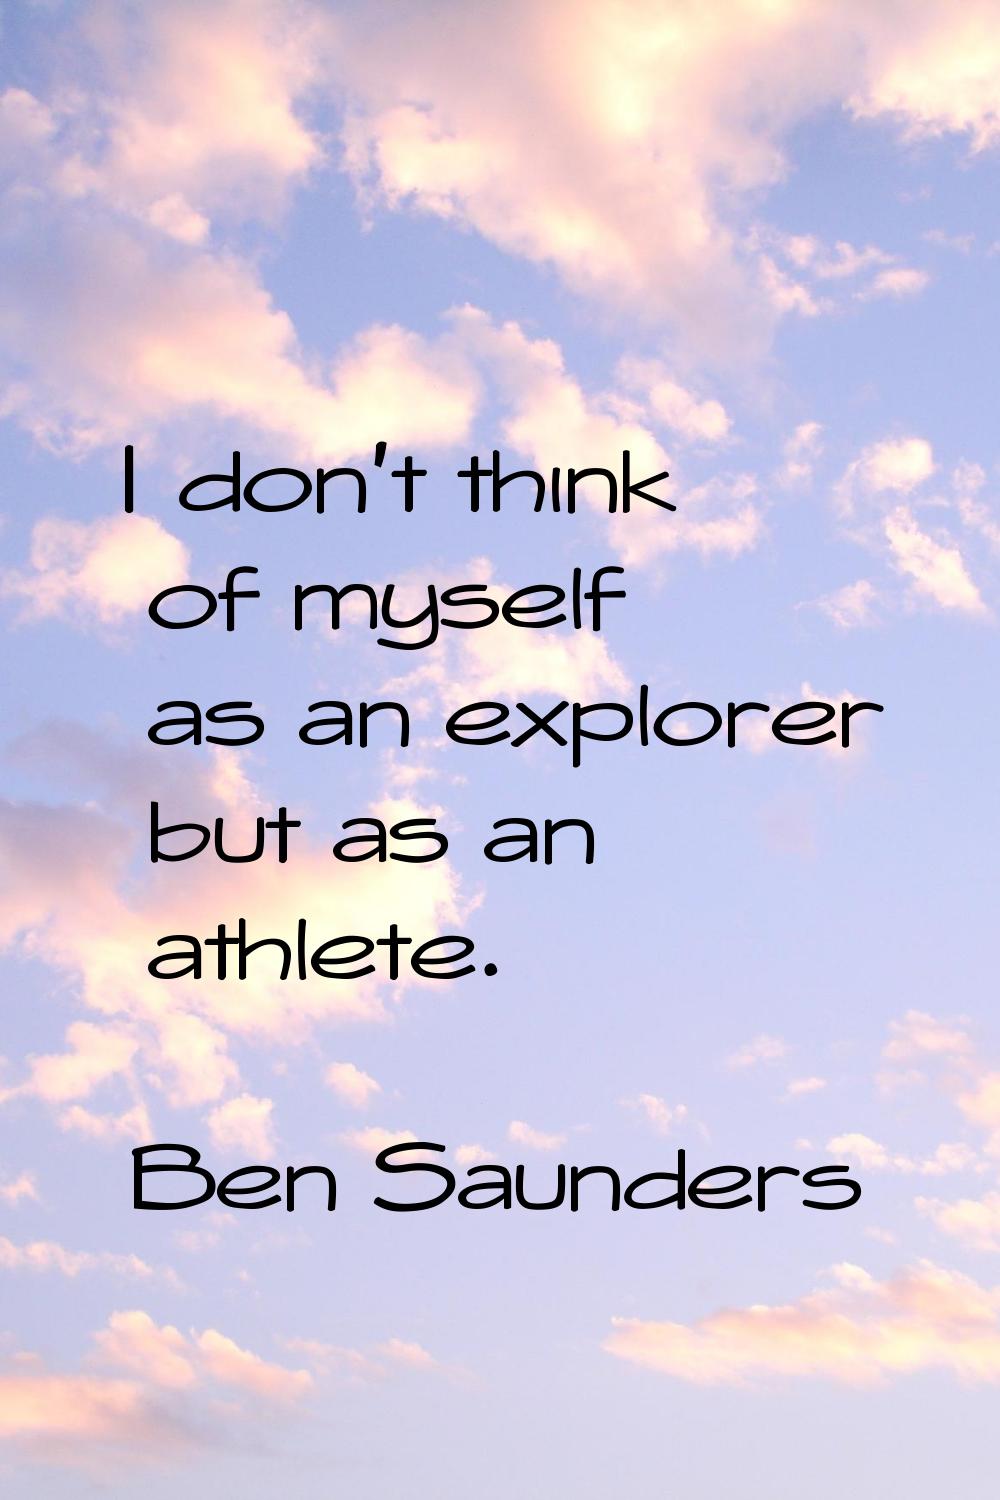 I don't think of myself as an explorer but as an athlete.